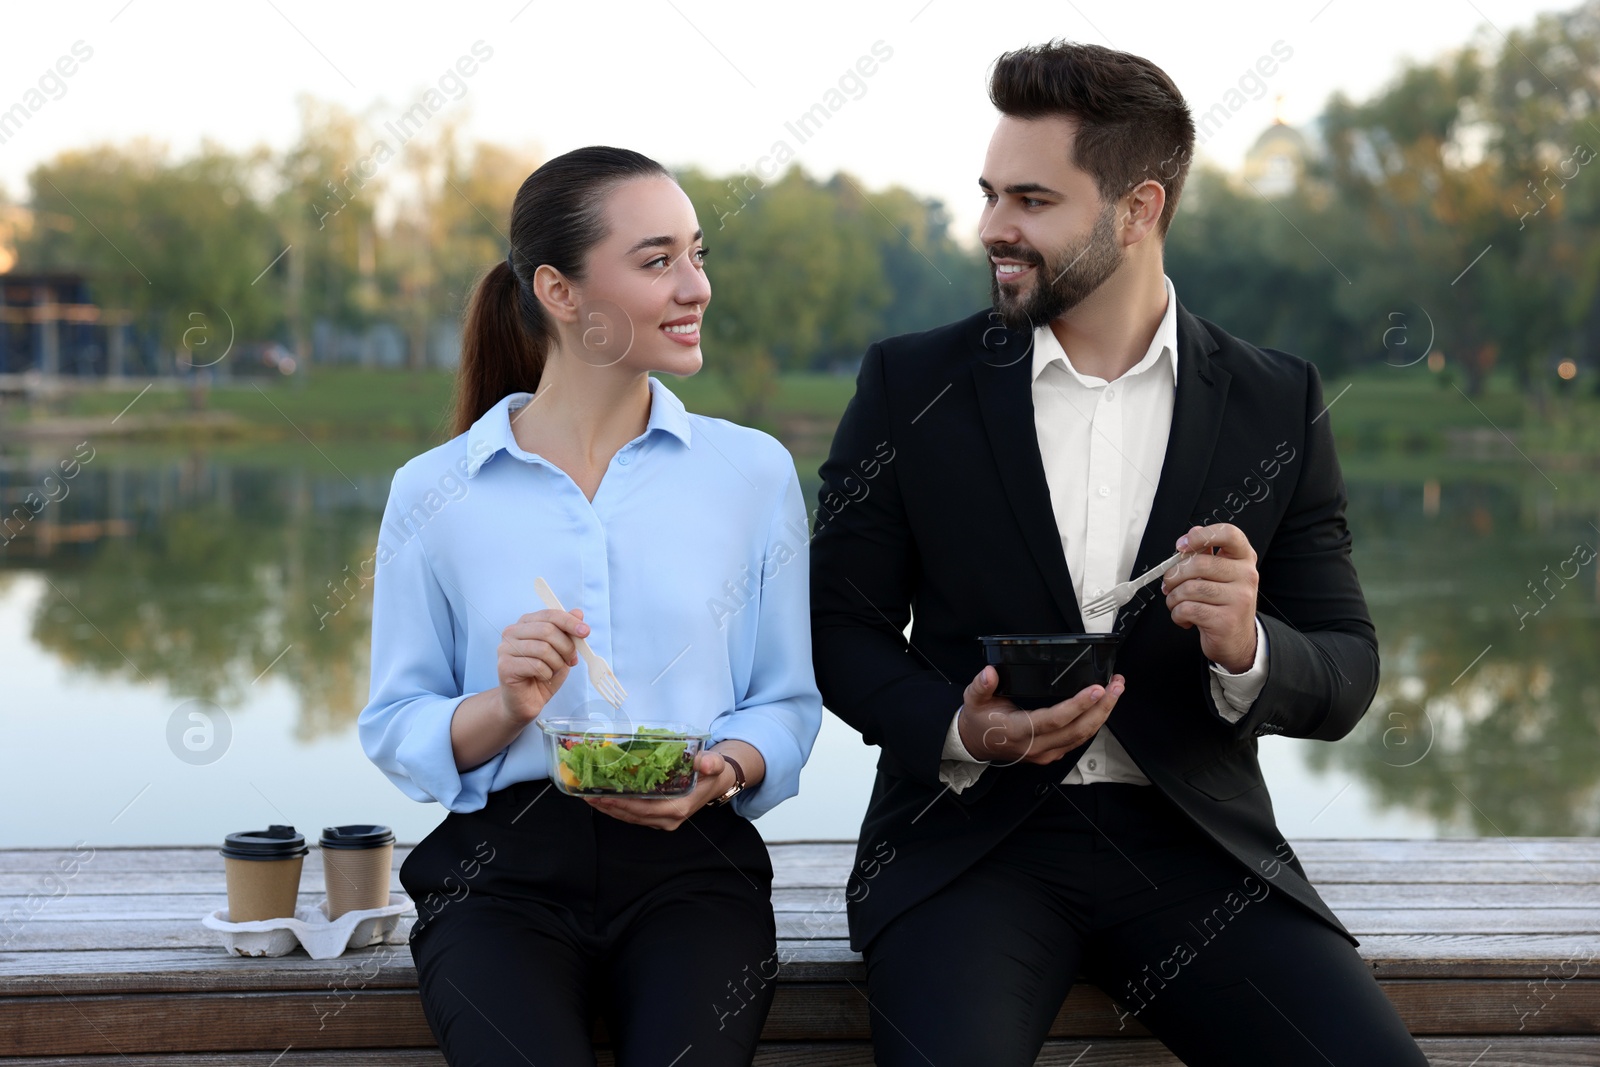 Photo of Smiling business people spending time together during lunch outdoors